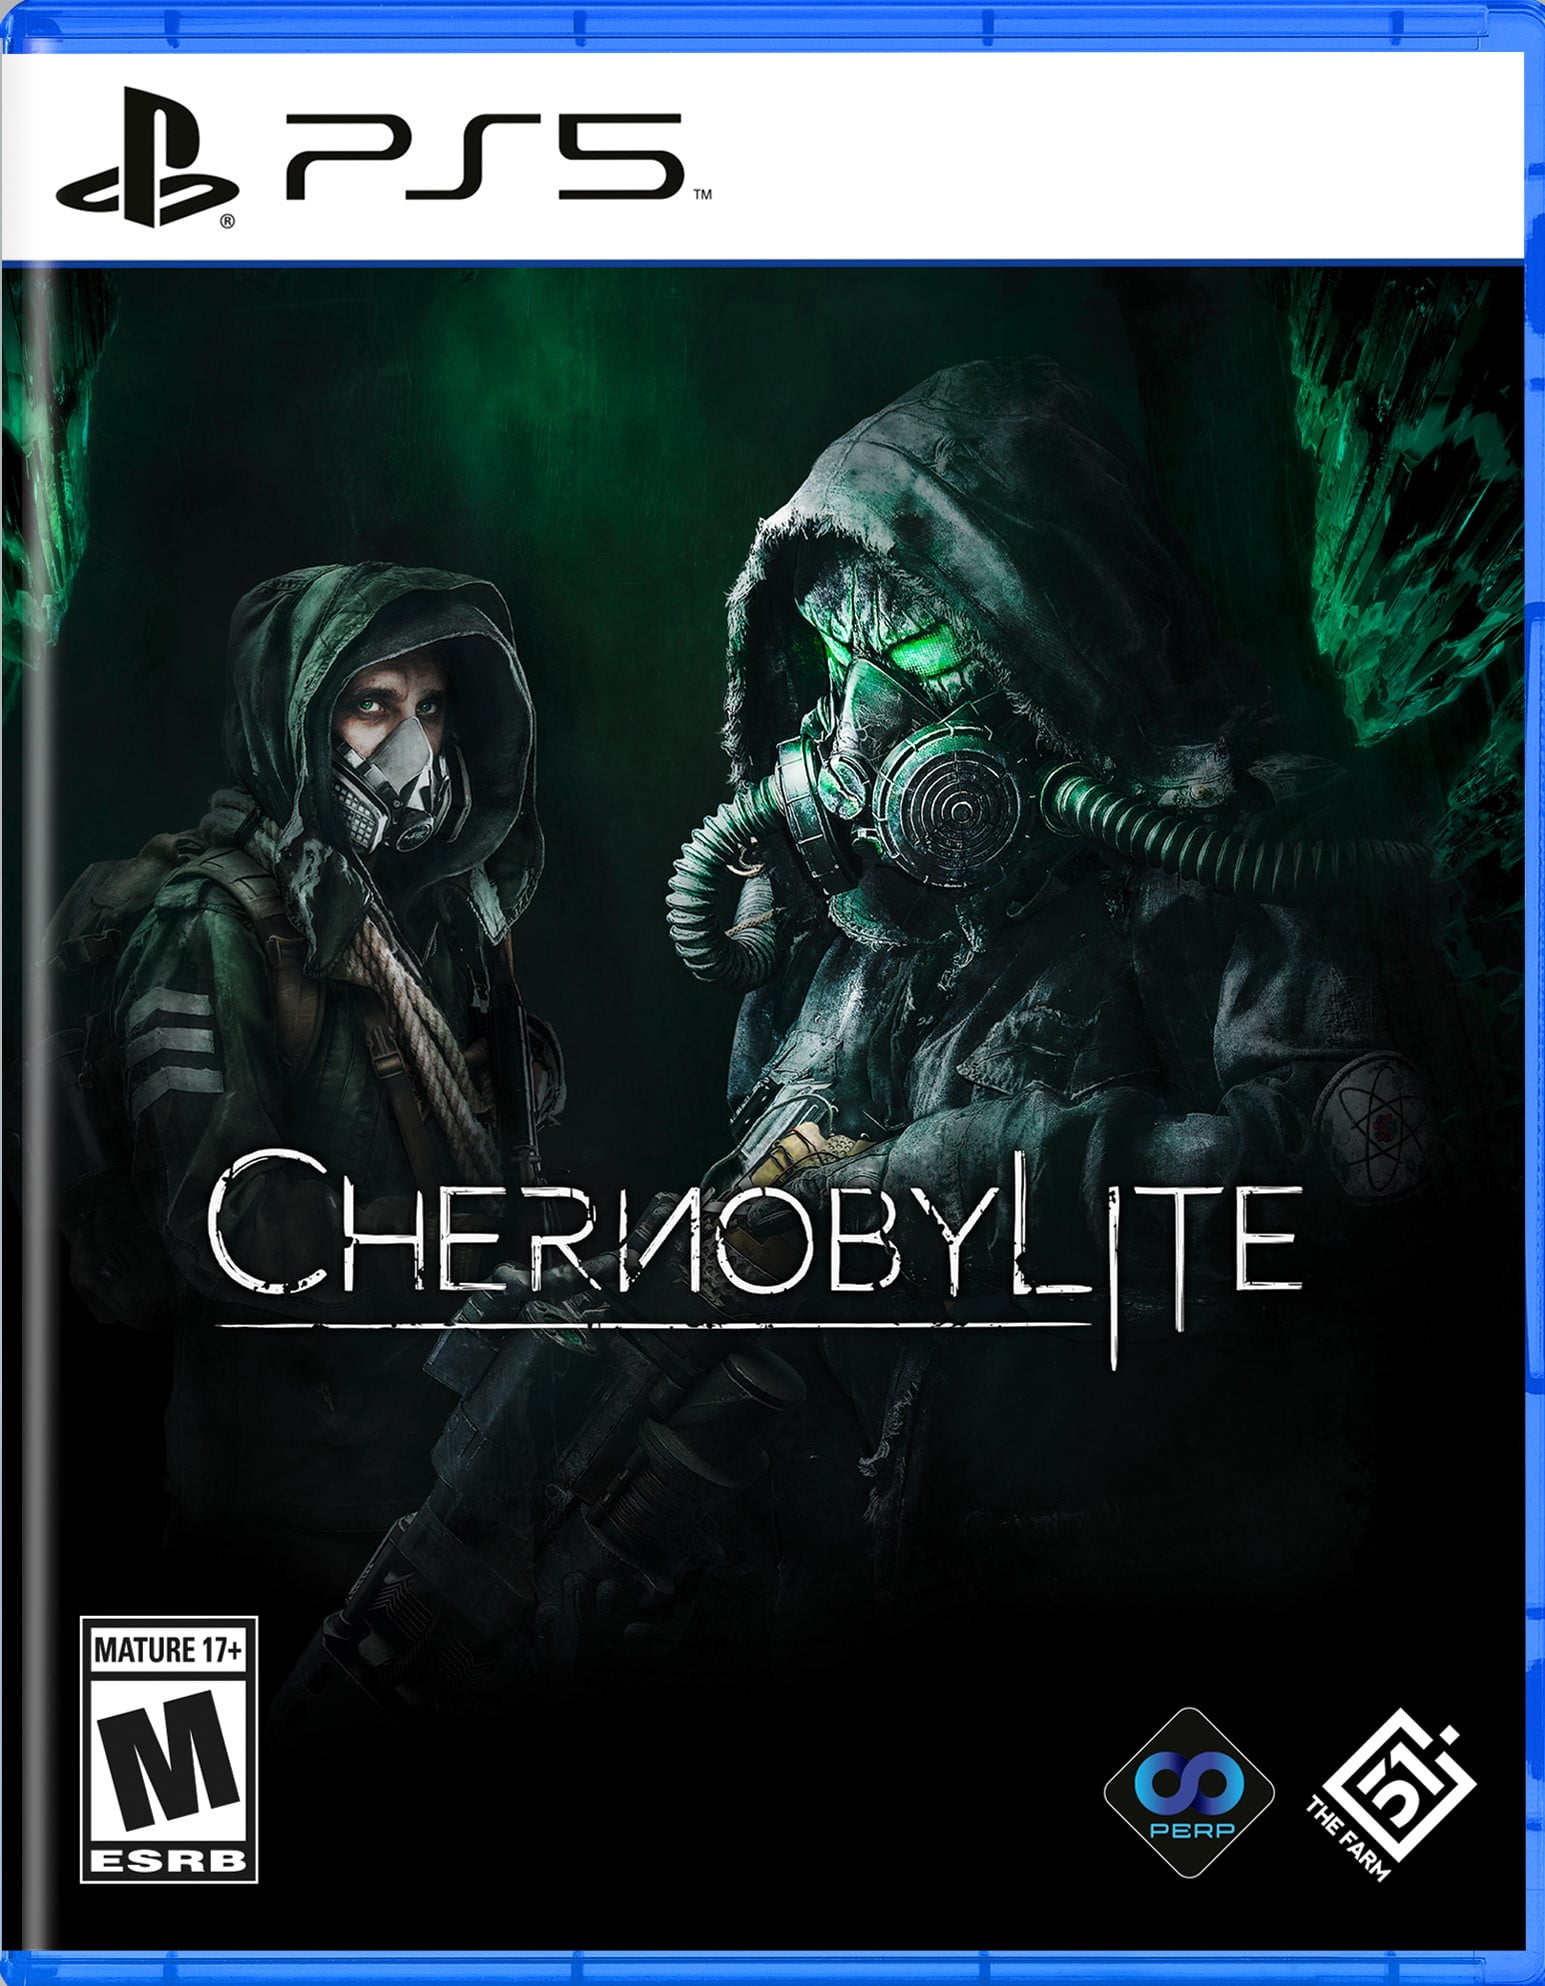 5, Chernobylite, Games, Farm The Perp 812303016639 PlayStation 51,